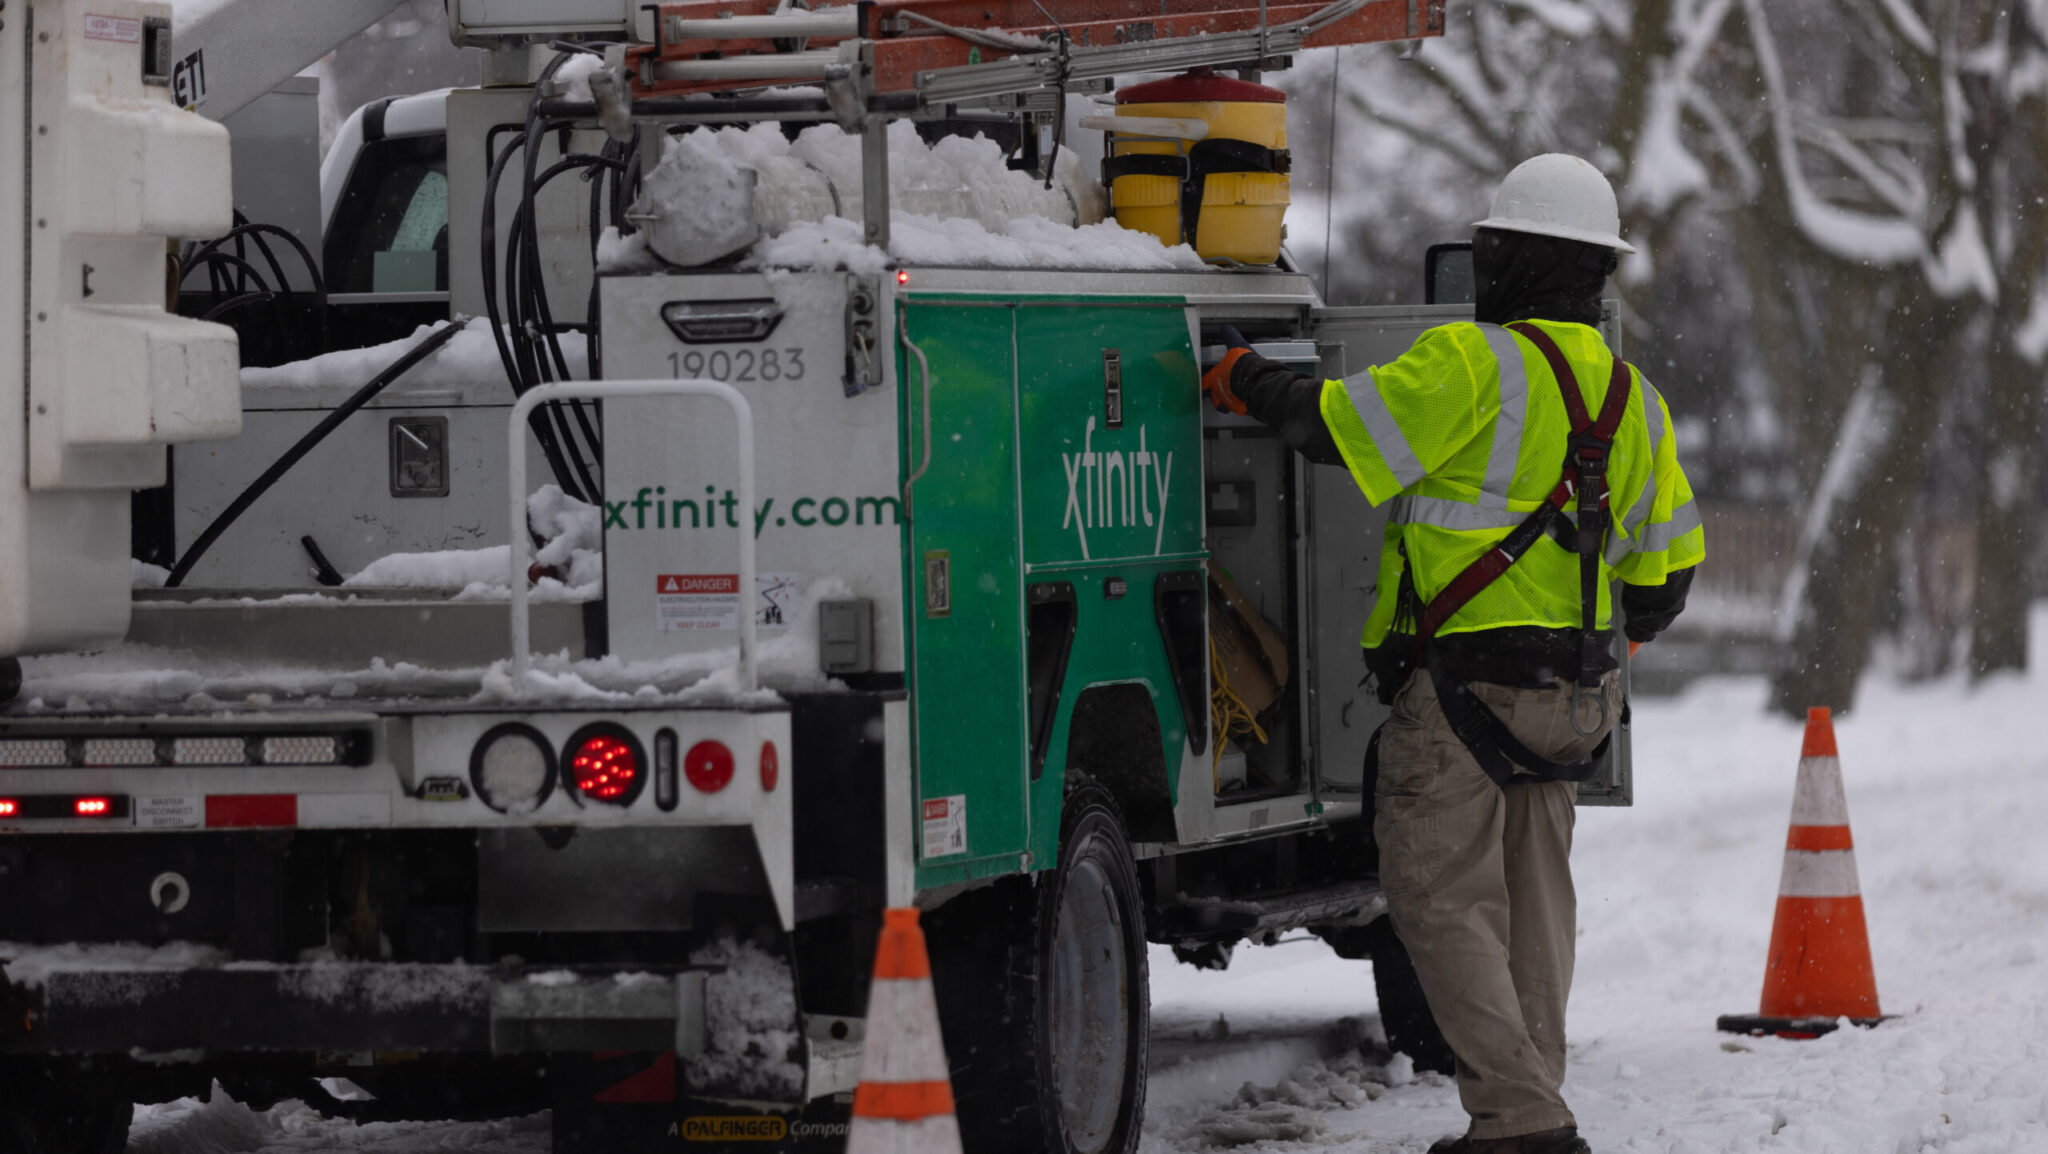 Comcast Response Teams Working to Restore Service Affected by Winter Storm Heather